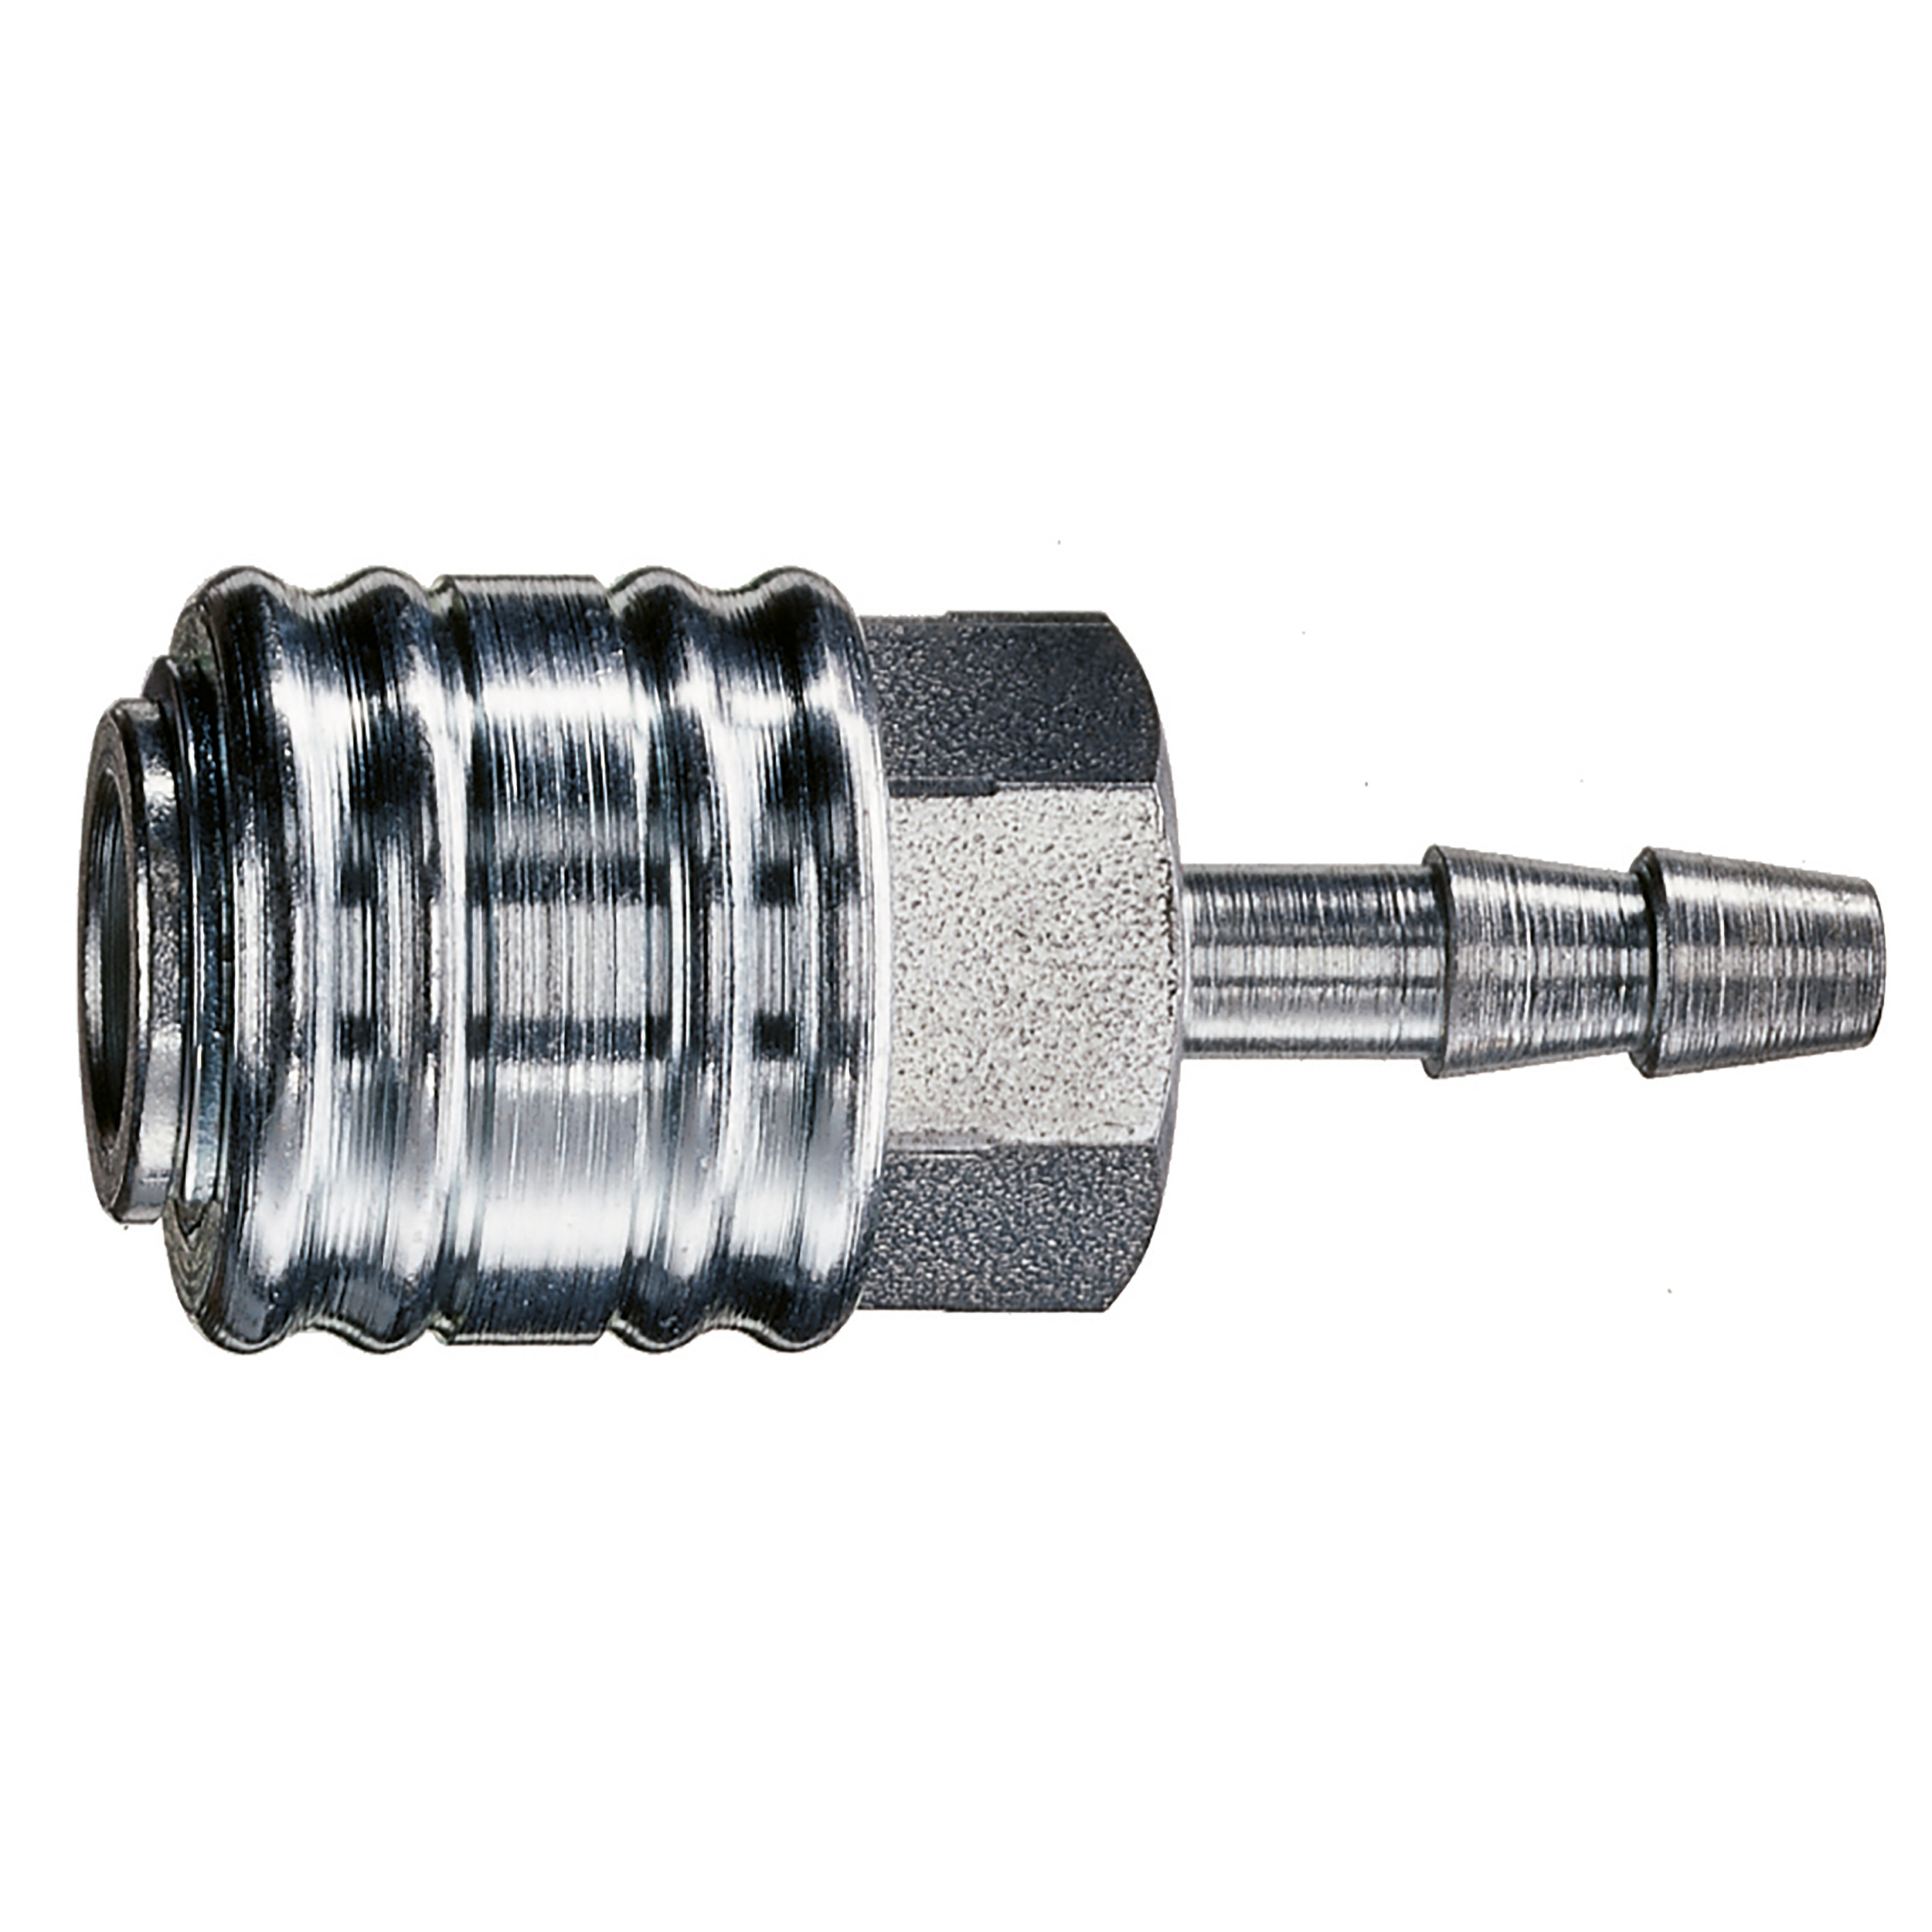 DN 7.2 standardcoupling, stainless steel, hose nozzle